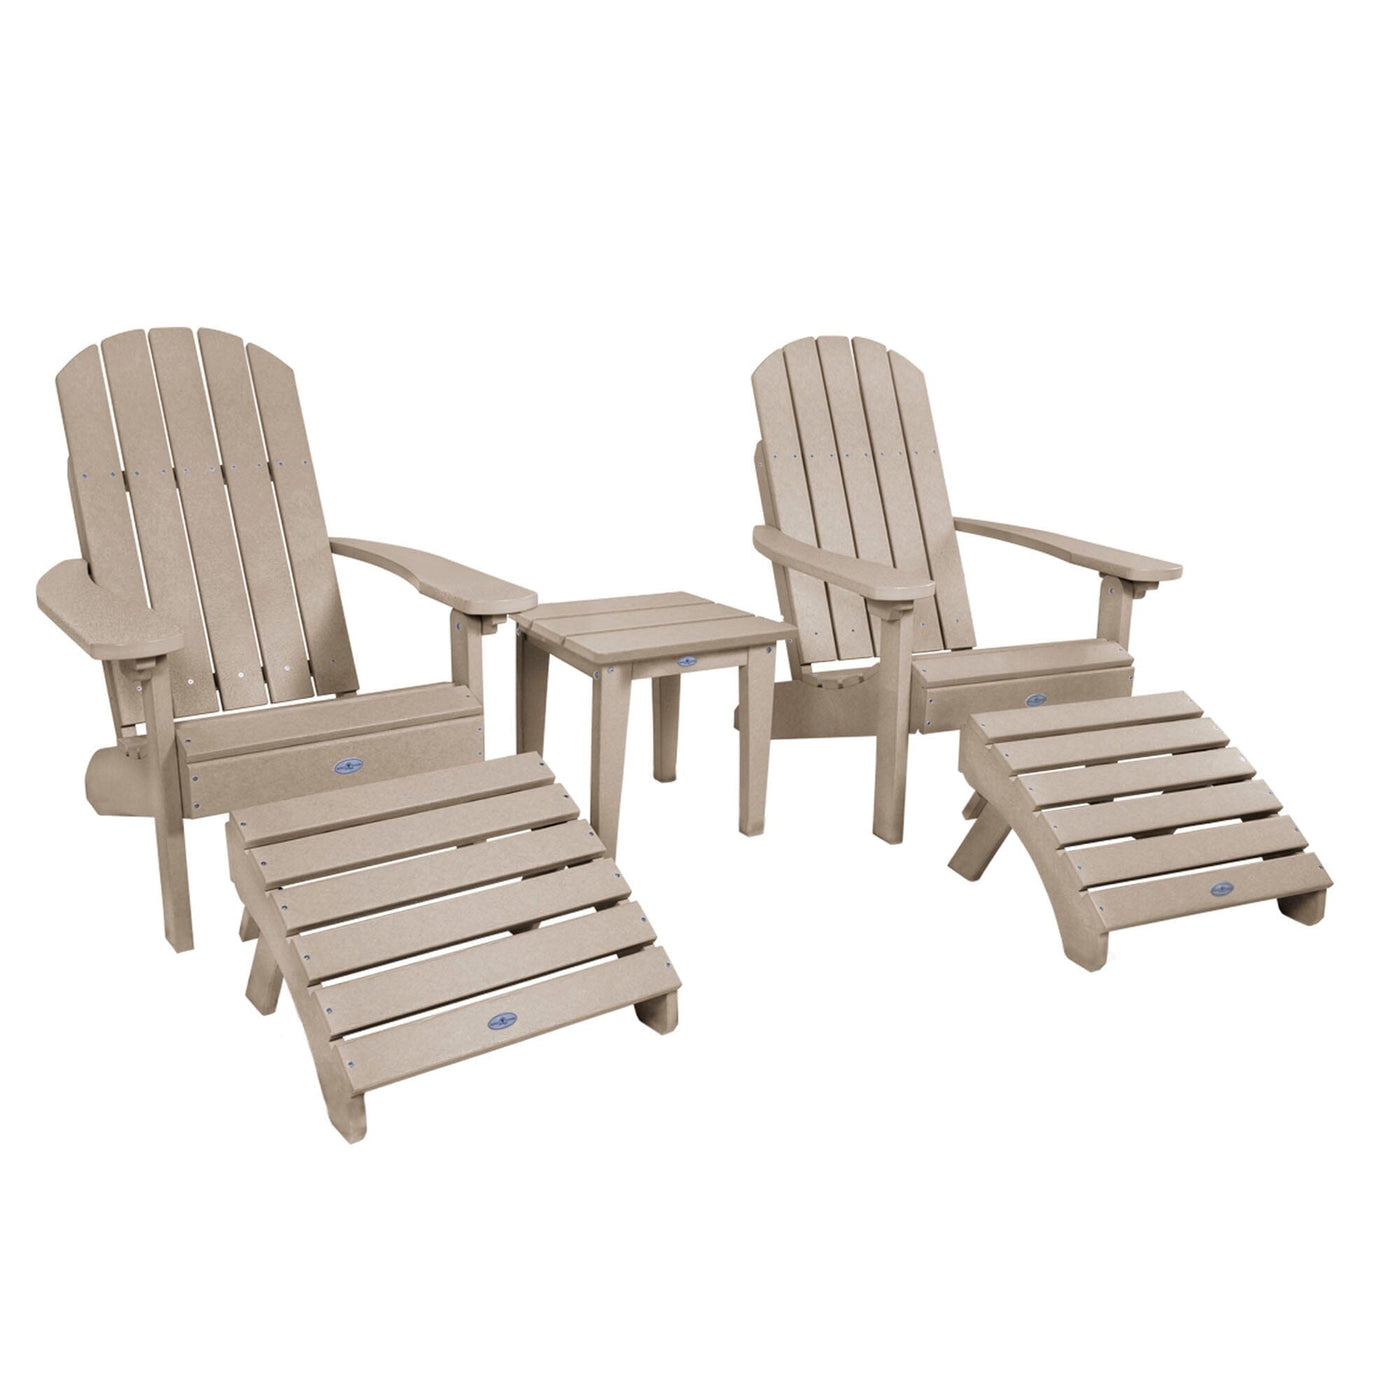 Two Cape Classic Adirondack Chairs, Side Table and Ottoman 5 pc Set Kitted Set Bahia Verde Outdoors Cabana Tan 